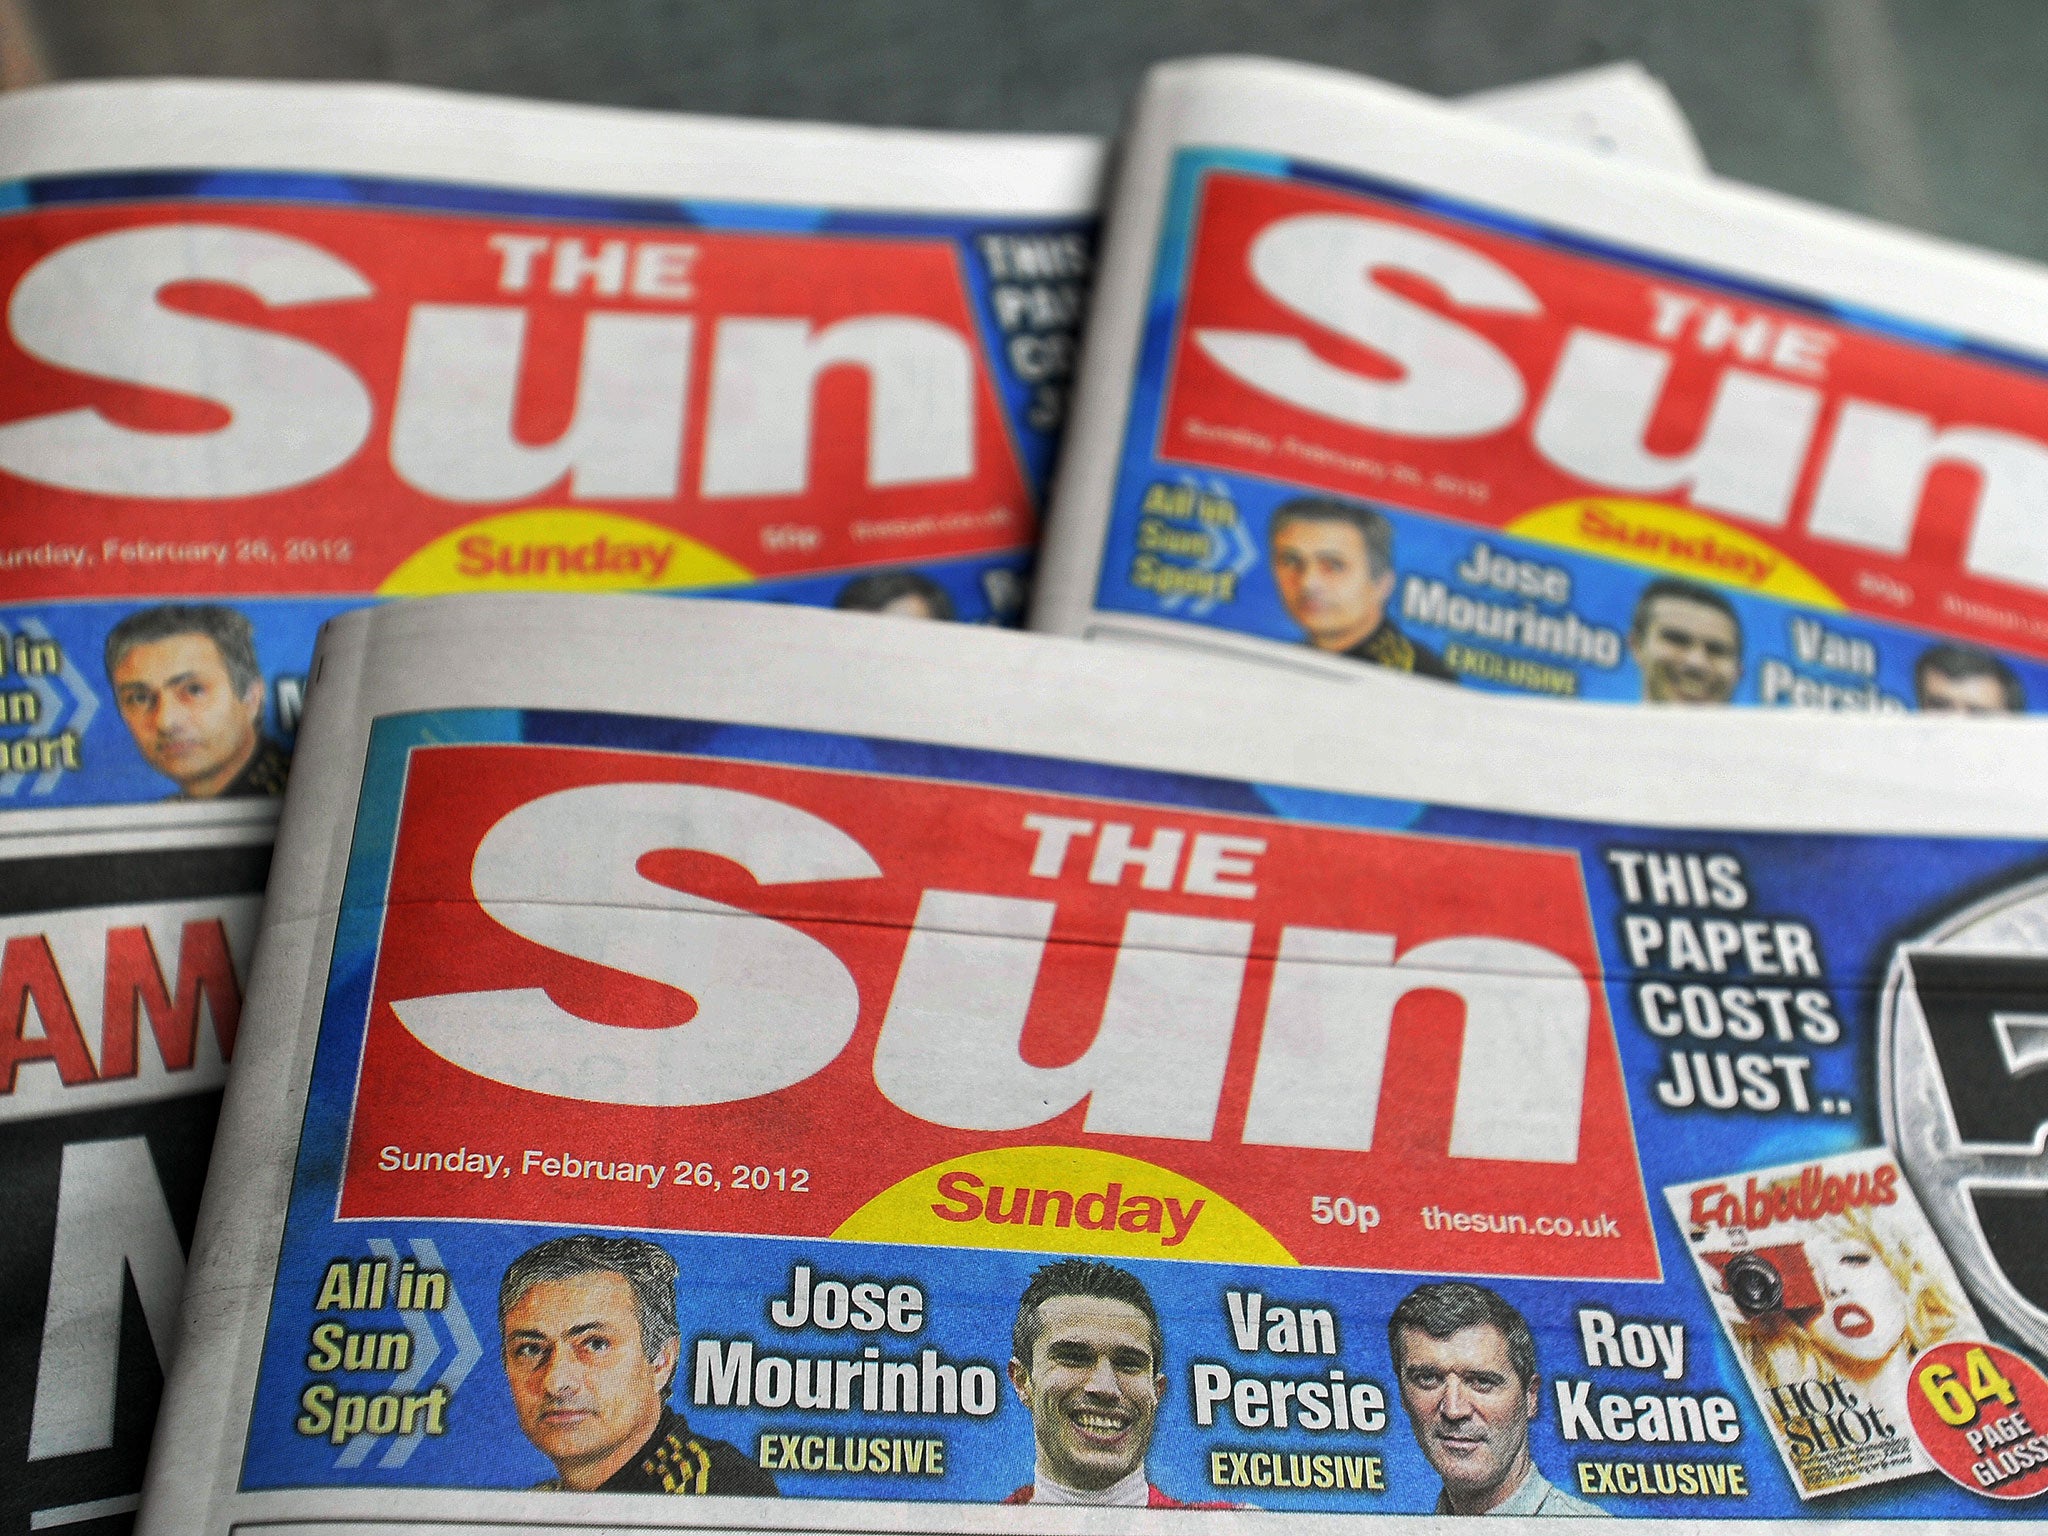 The Sun on Sunday is trying to overturn the order